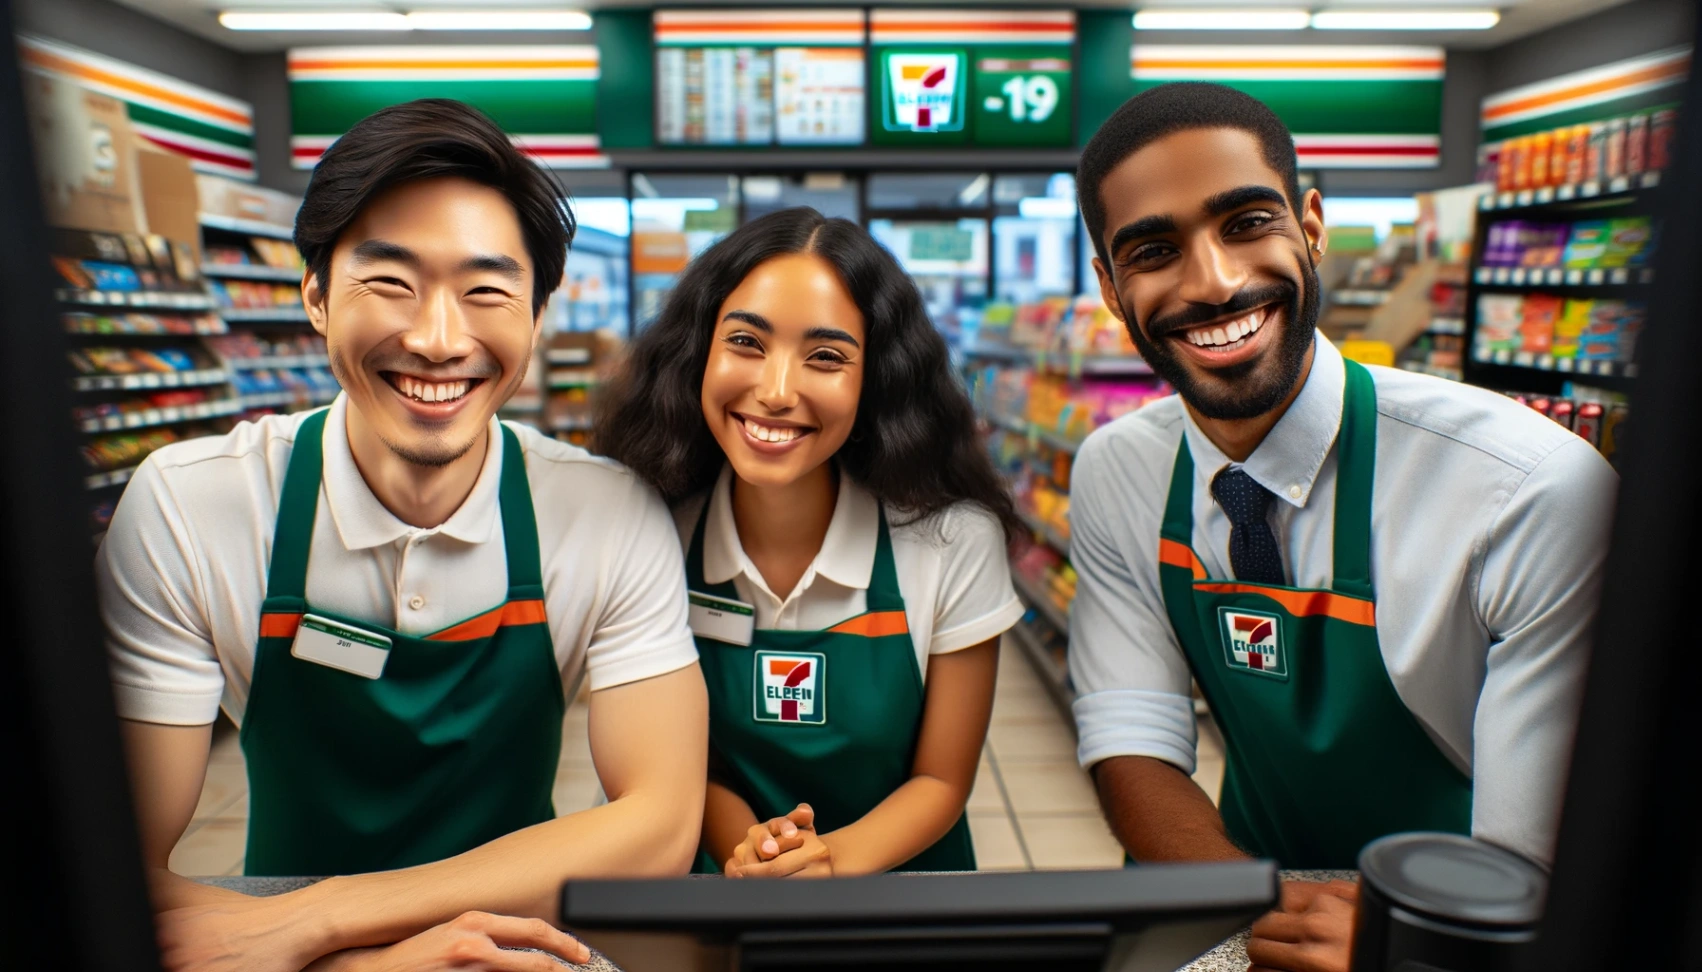 7-Eleven is Hiring: Discover How to Apply Online for Vacancies